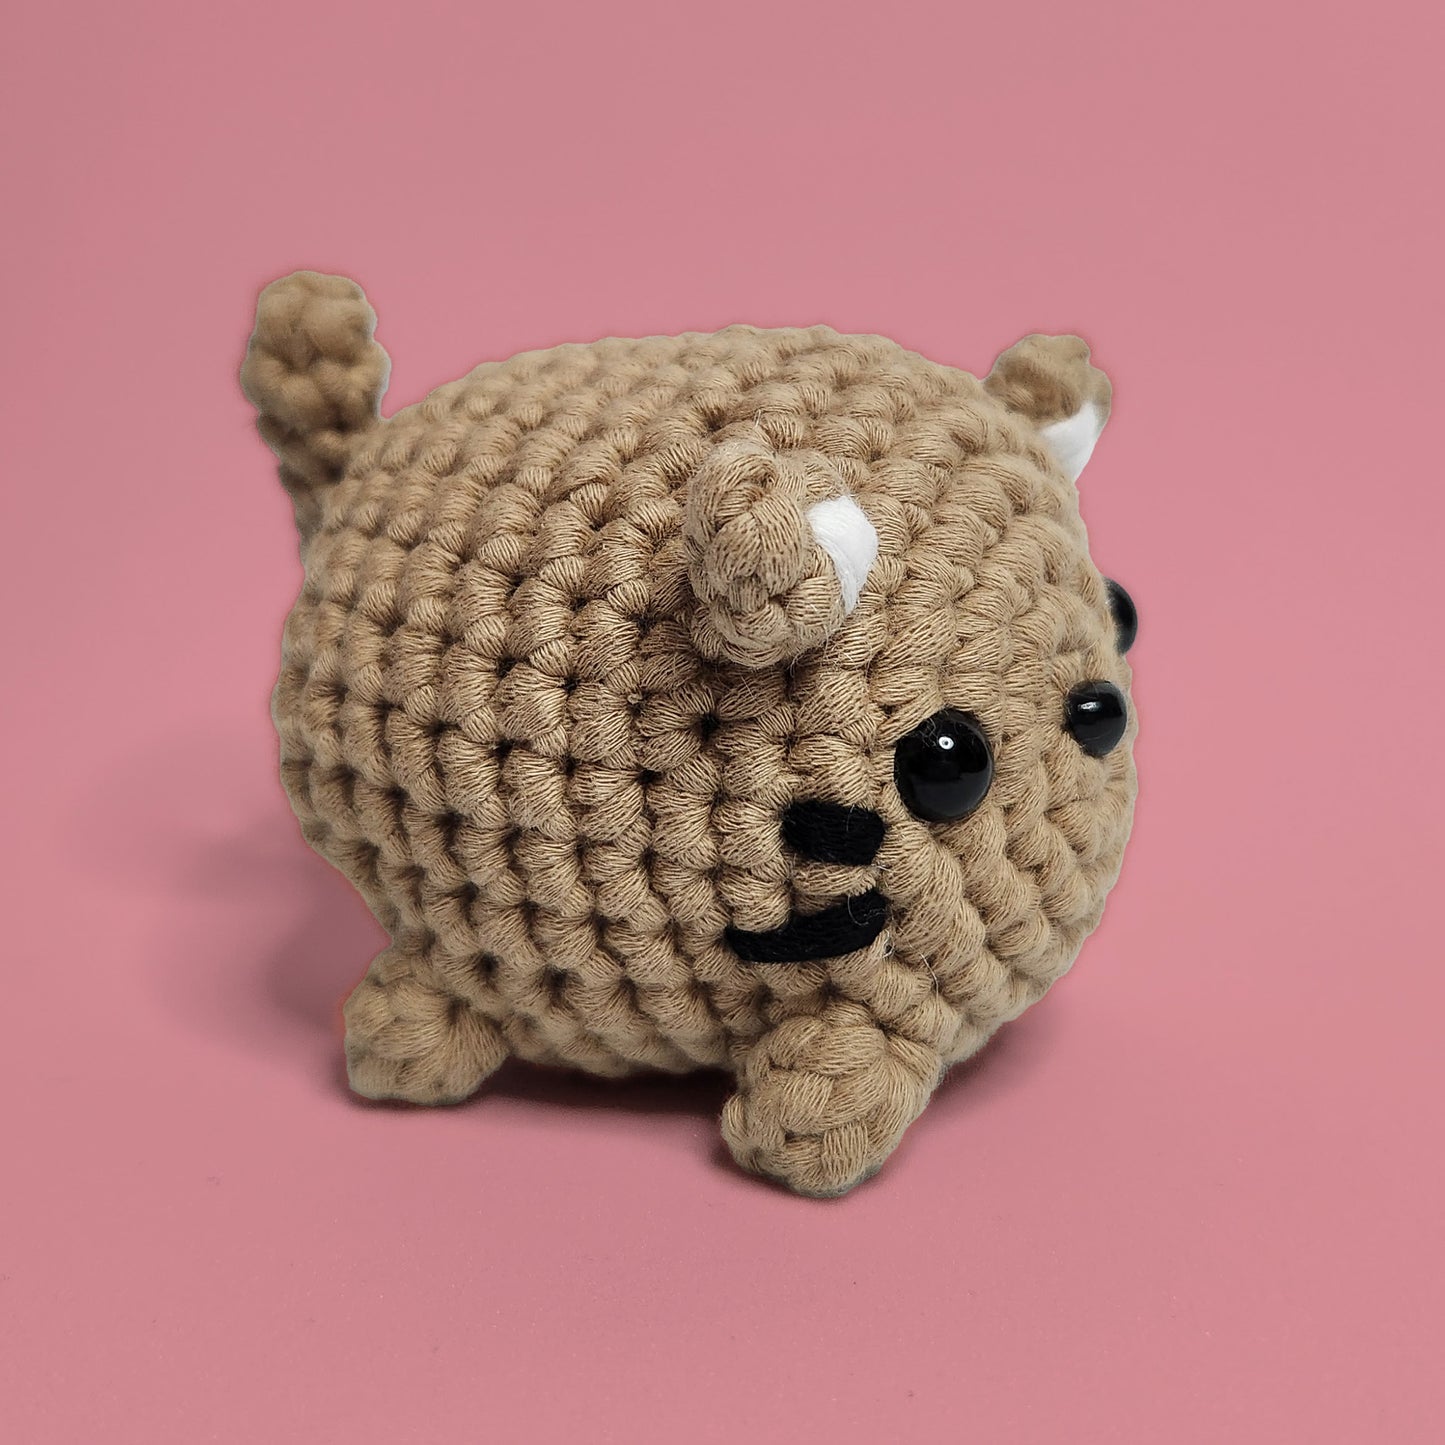 Brown cat crochet amigurumi with whiskers and ears. Handcrafted with care, this charming cat is a purr-fect project for cat lovers and crochet enthusiasts. Side view.